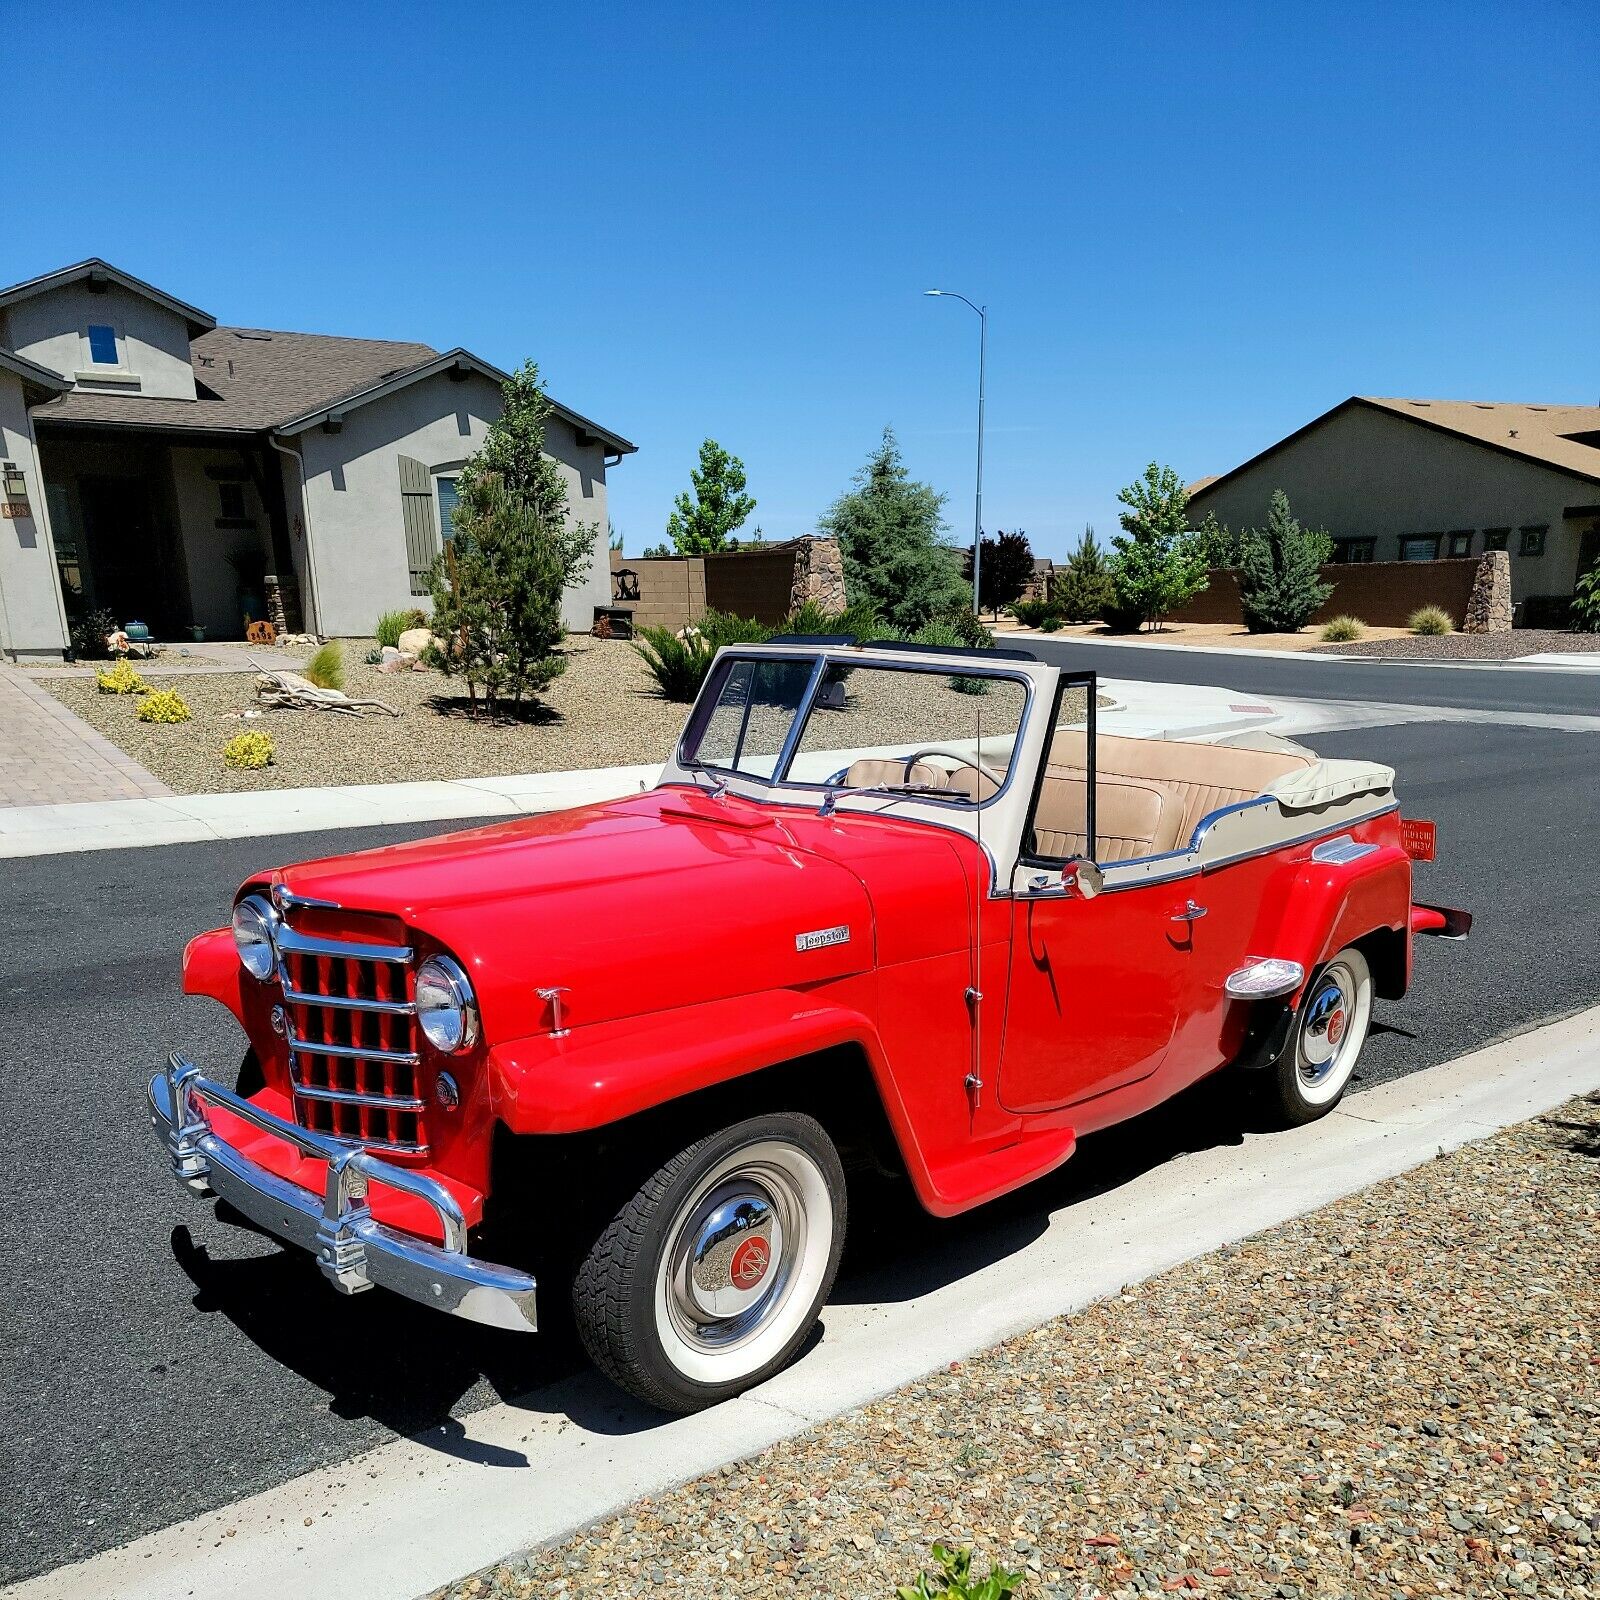 1950 Jeep Jeepster  A Super Driving Thumbs Up Driving Car. Head Turning With Many Compliments